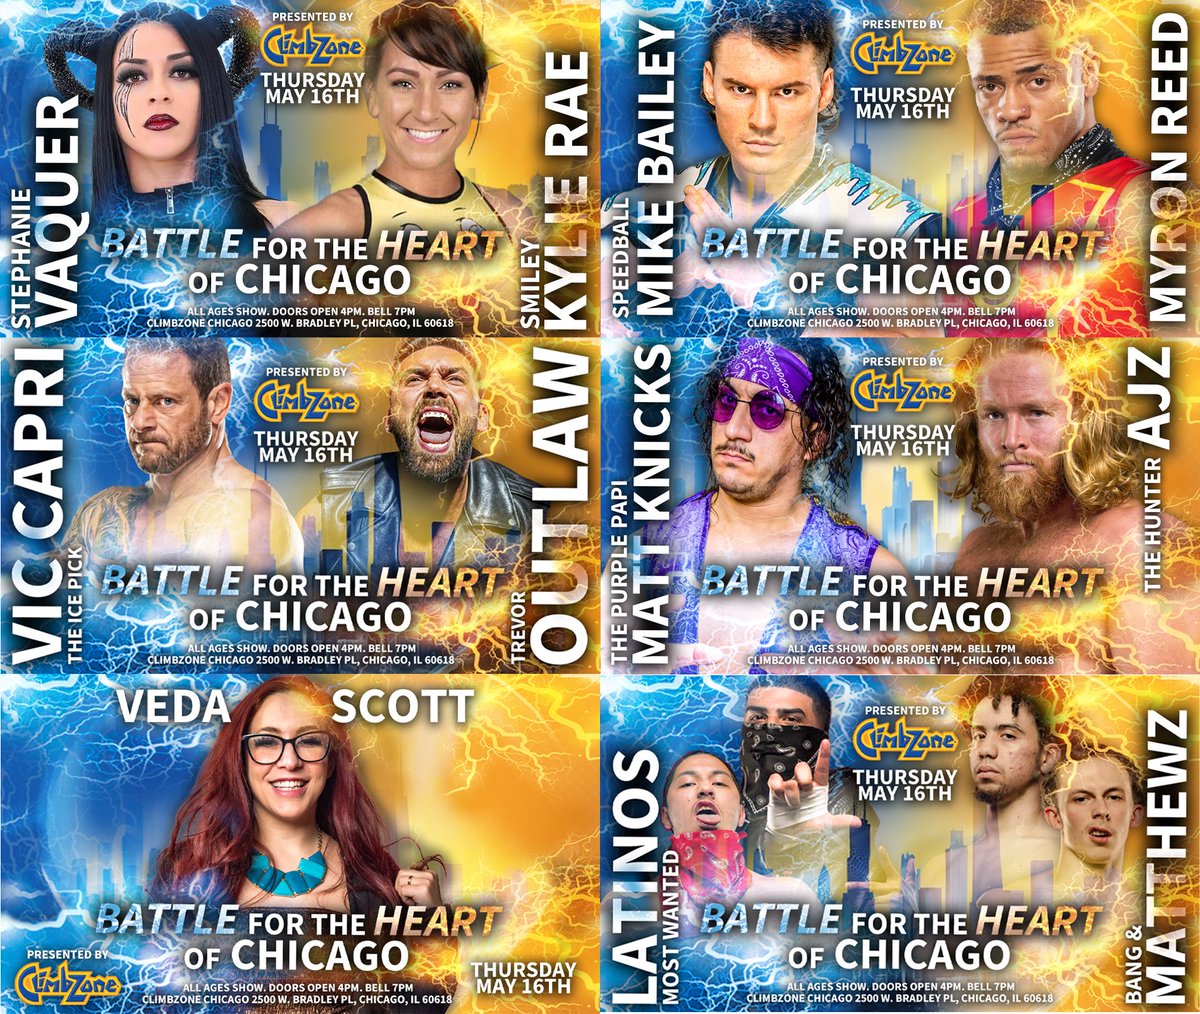 This card for Thursday, May 16 in Chicago absolutely SLAPS! First-ever, all-timer women's match between the most beloved Chicago wrestler and the most impressive and fastest rising women's wrestler across multiple companies Super banger among two of the most talented in the…